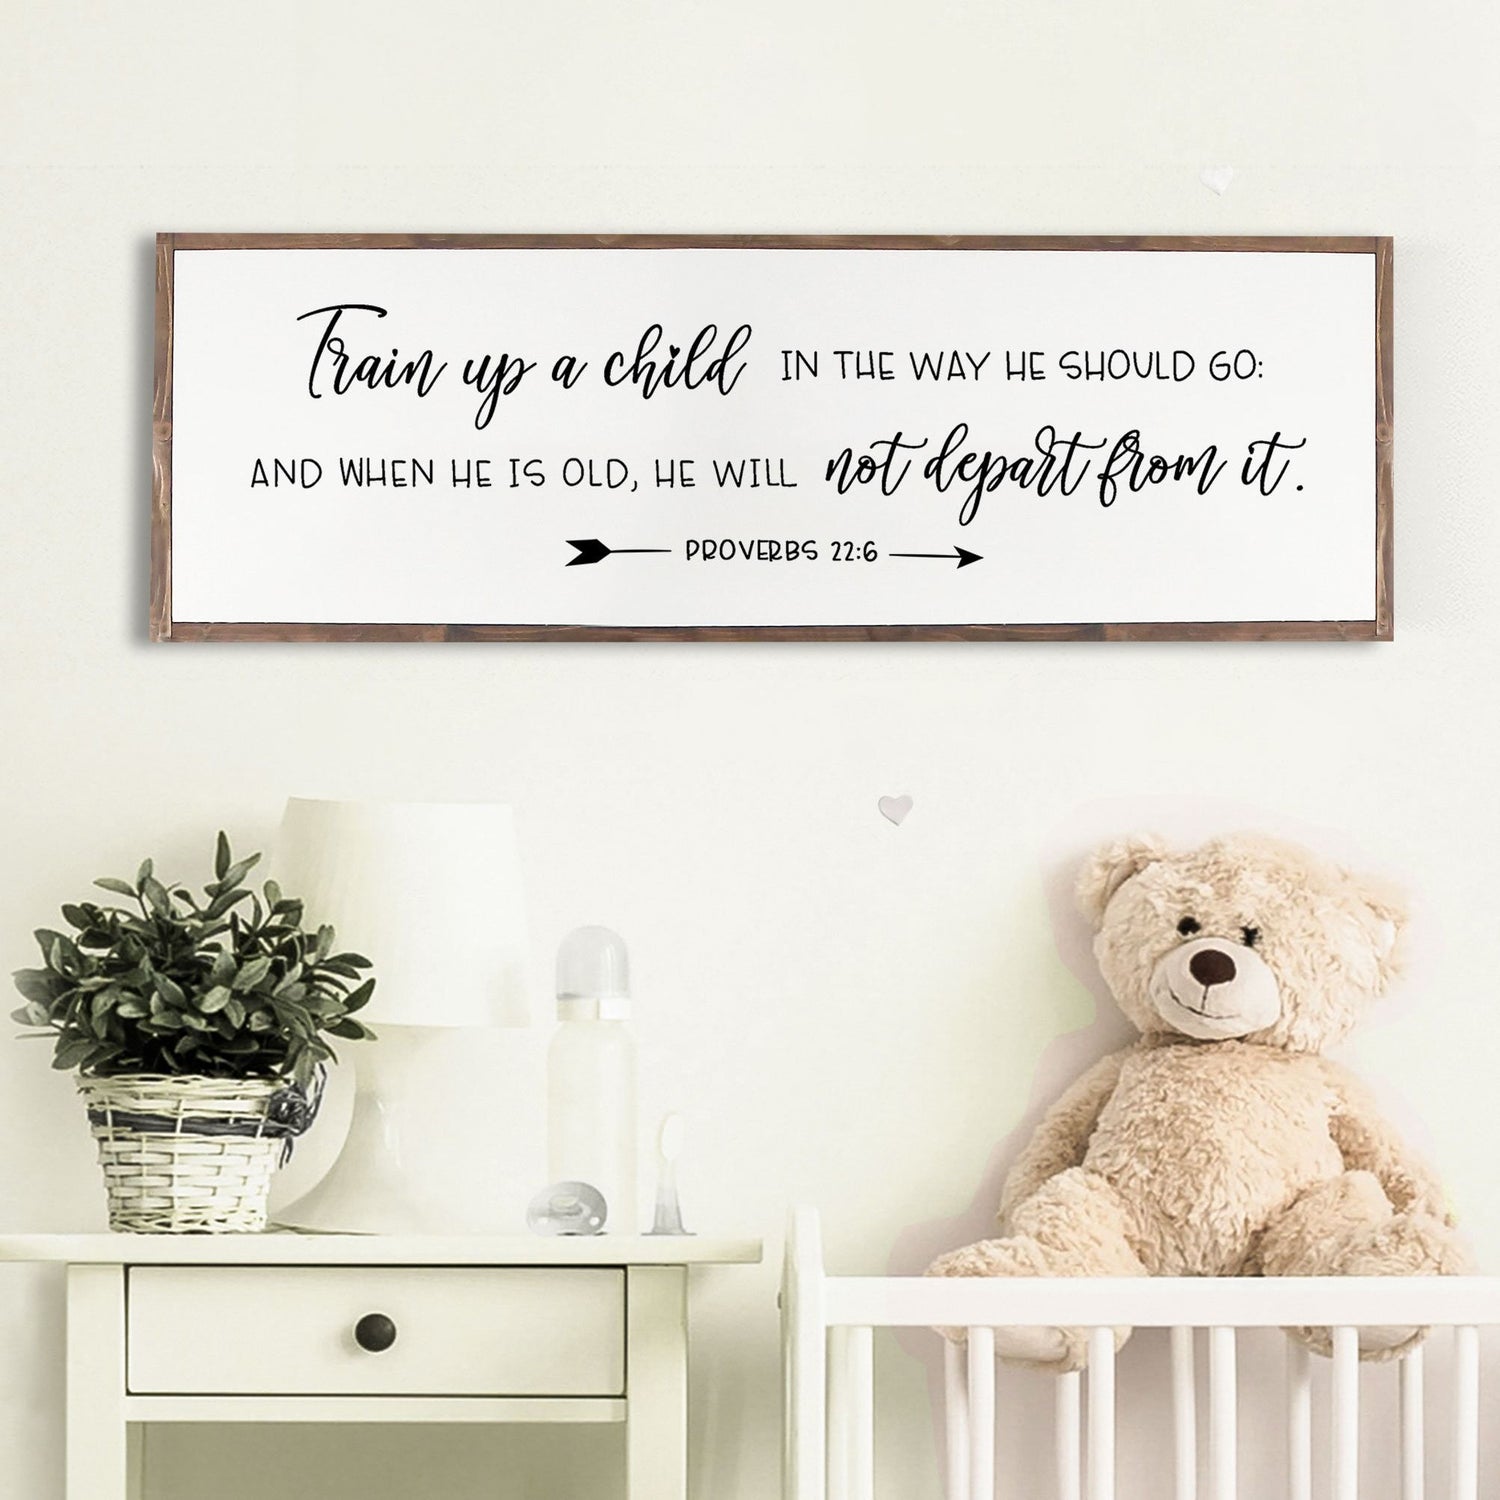 Train Up A Child In The Way He Should Go Wood Sign, Hand Painted, Nursery Rustic Wood Sign BEDROOM SIGN Proverbs 22:6 - Forever Written